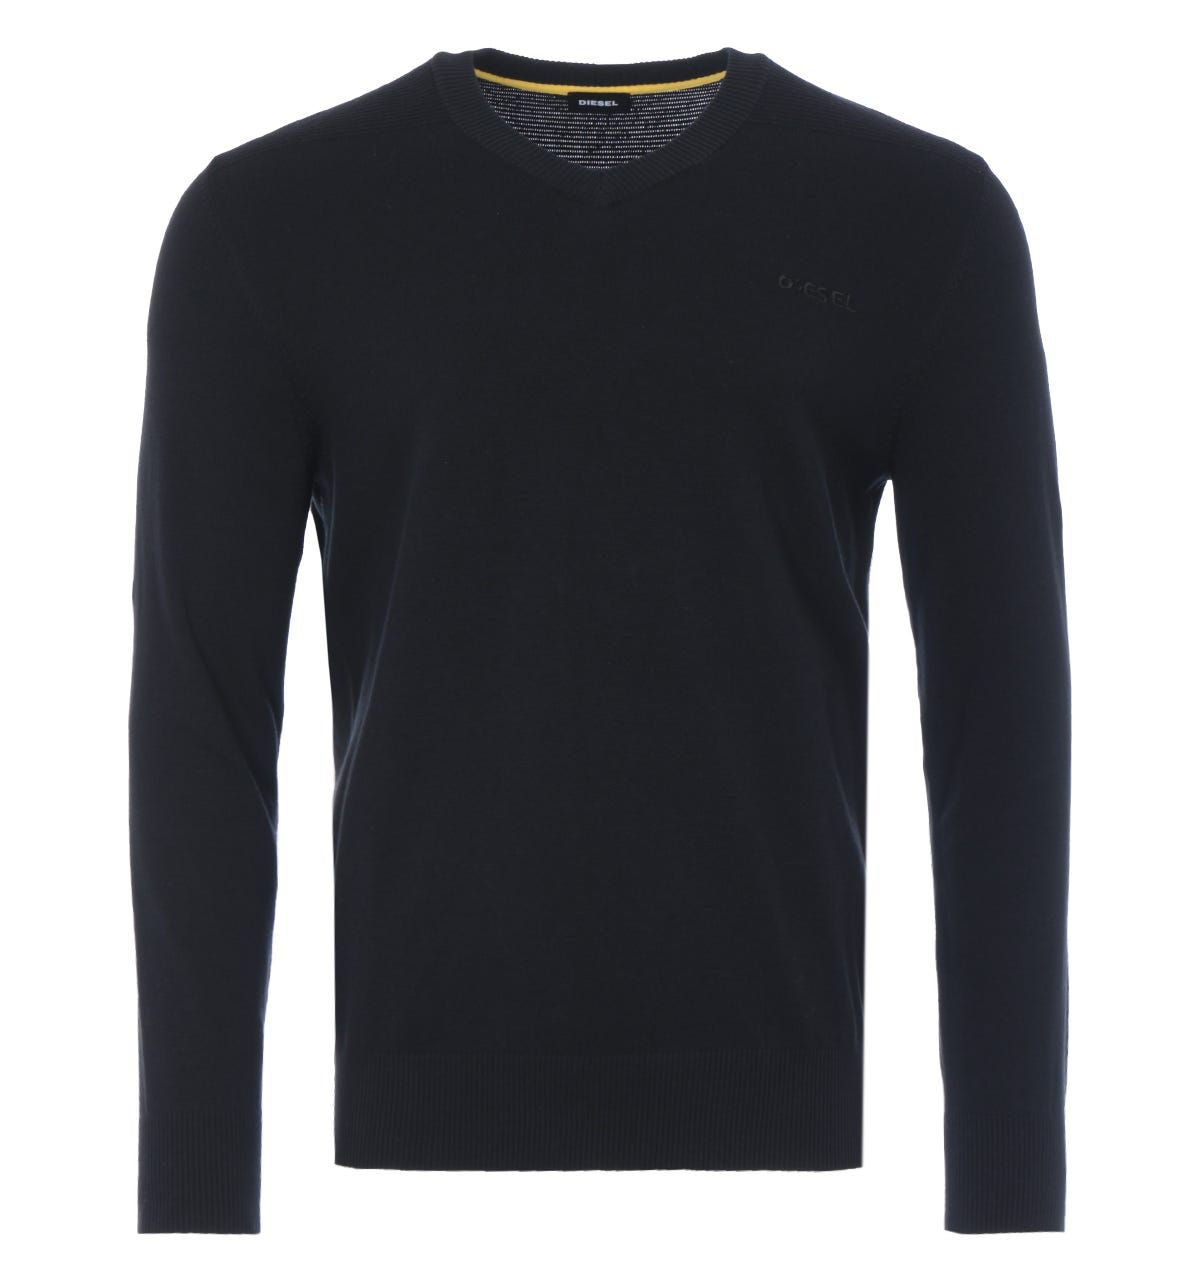 Knitted from a stretch cotton blend, this classic v-neck sweater, has been refreshed with Diesel DNA. Featuring a ribbed v-neck, cuffs and hem, with horizontal rib-knit detailing to the shoulders. Finished with the iconic broken Diesel logo embroidered at the chest.Regular Fit, Stretch Cotton Blend, Classic V-Neck, Ribbed Cuffs & Hemline, Horizontal Rib-Knit Shoulder Detail, Diesel Branding. Style & Fit:Regular Fit, Fits True to Size. Composition & Care:78% Cotton, 19% Nylon, 3% Elastane, Machine Wash.